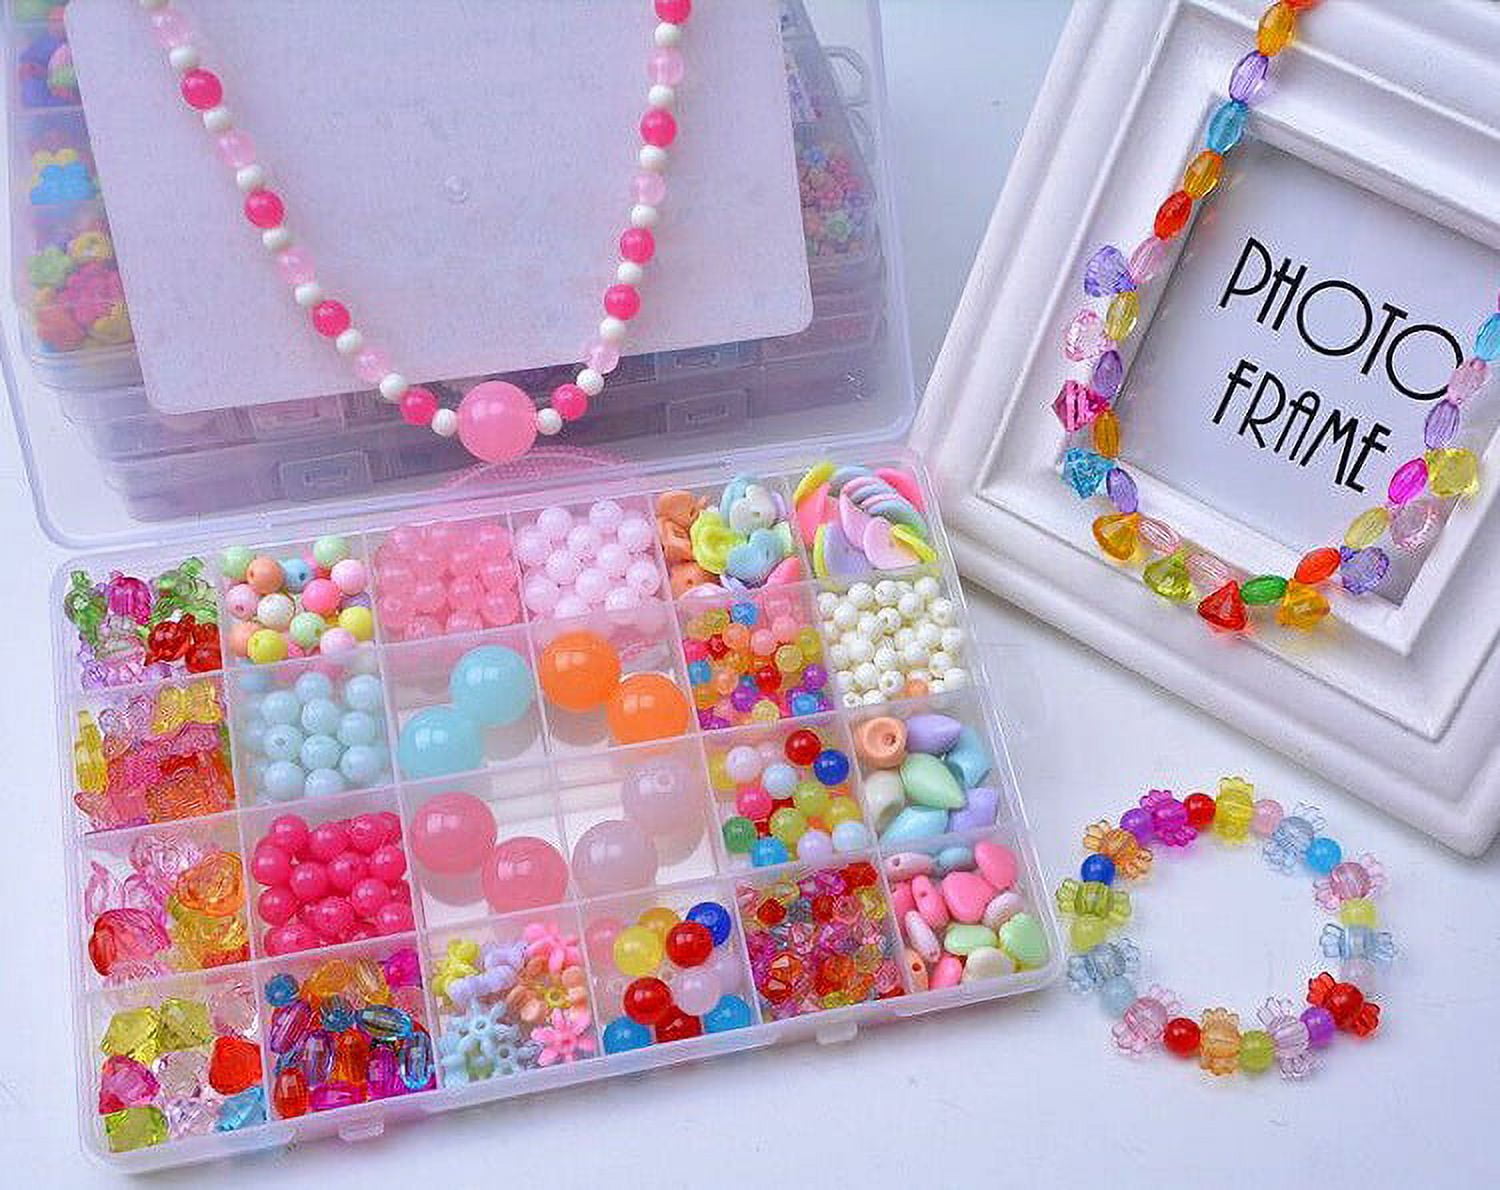 62PCS DIY Bracelet Making Kit,Charm Jewelry Making Kit with  Bracelet,Pendant, Beads,Charms and Necklace String for Bracelets Craft &  Necklace Making, for Girls Age 8-12 